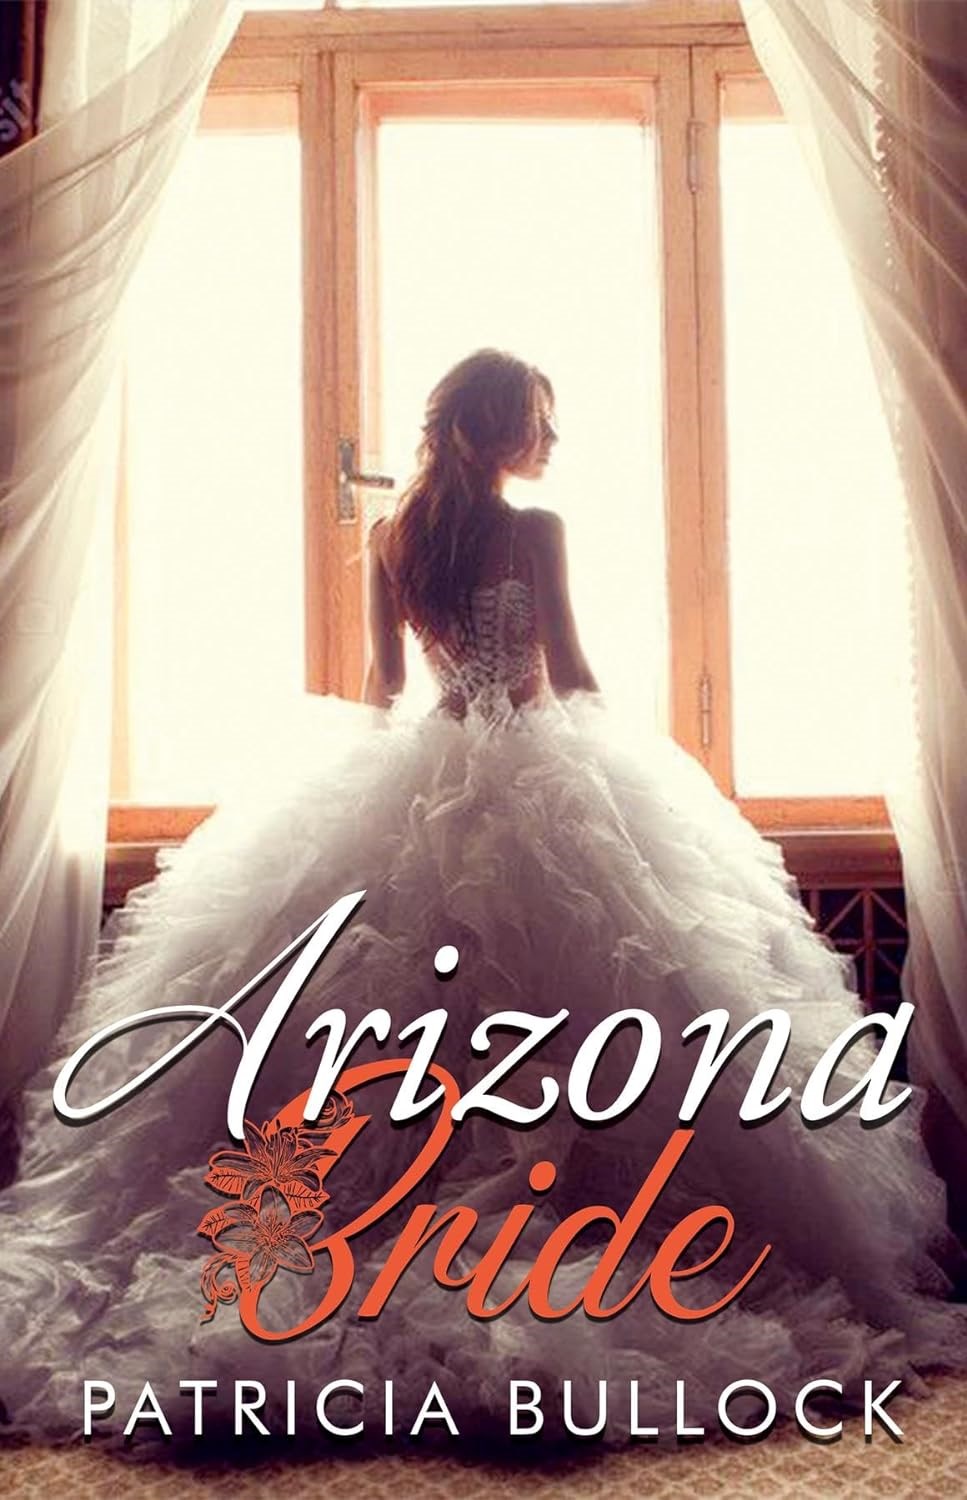 New Romance Novel "Arizona Bride" by Patty Bullock Takes Readers on a Journey of Love and Self-Discovery